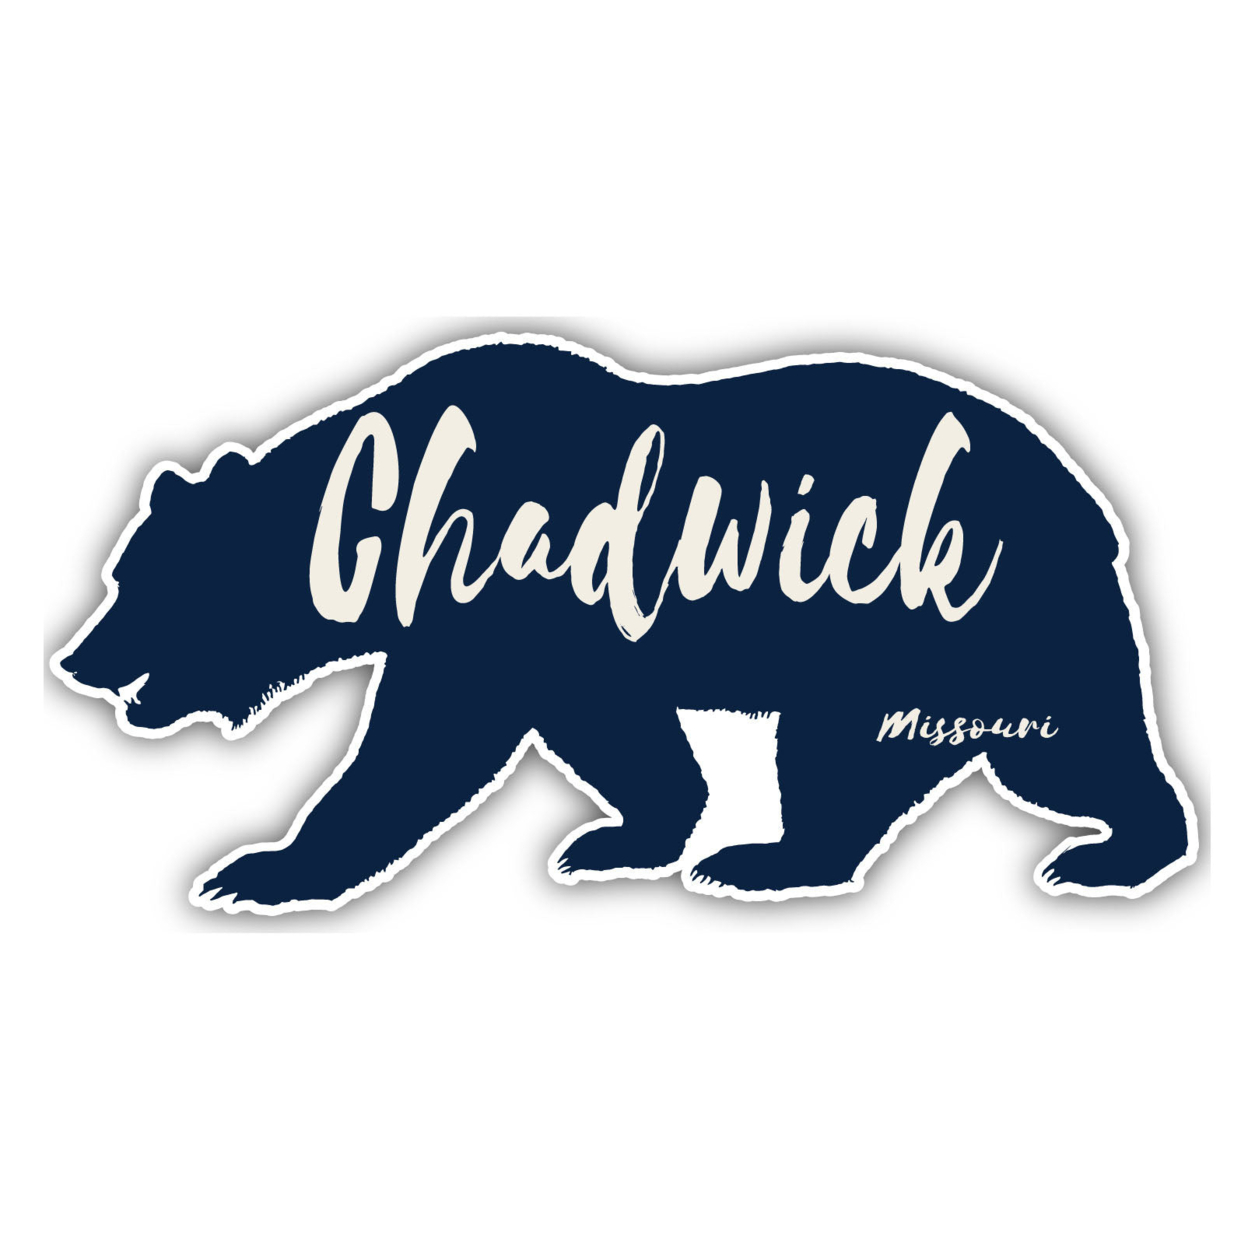 Chadwick Missouri Souvenir Decorative Stickers (Choose Theme And Size) - 4-Pack, 12-Inch, Adventures Awaits